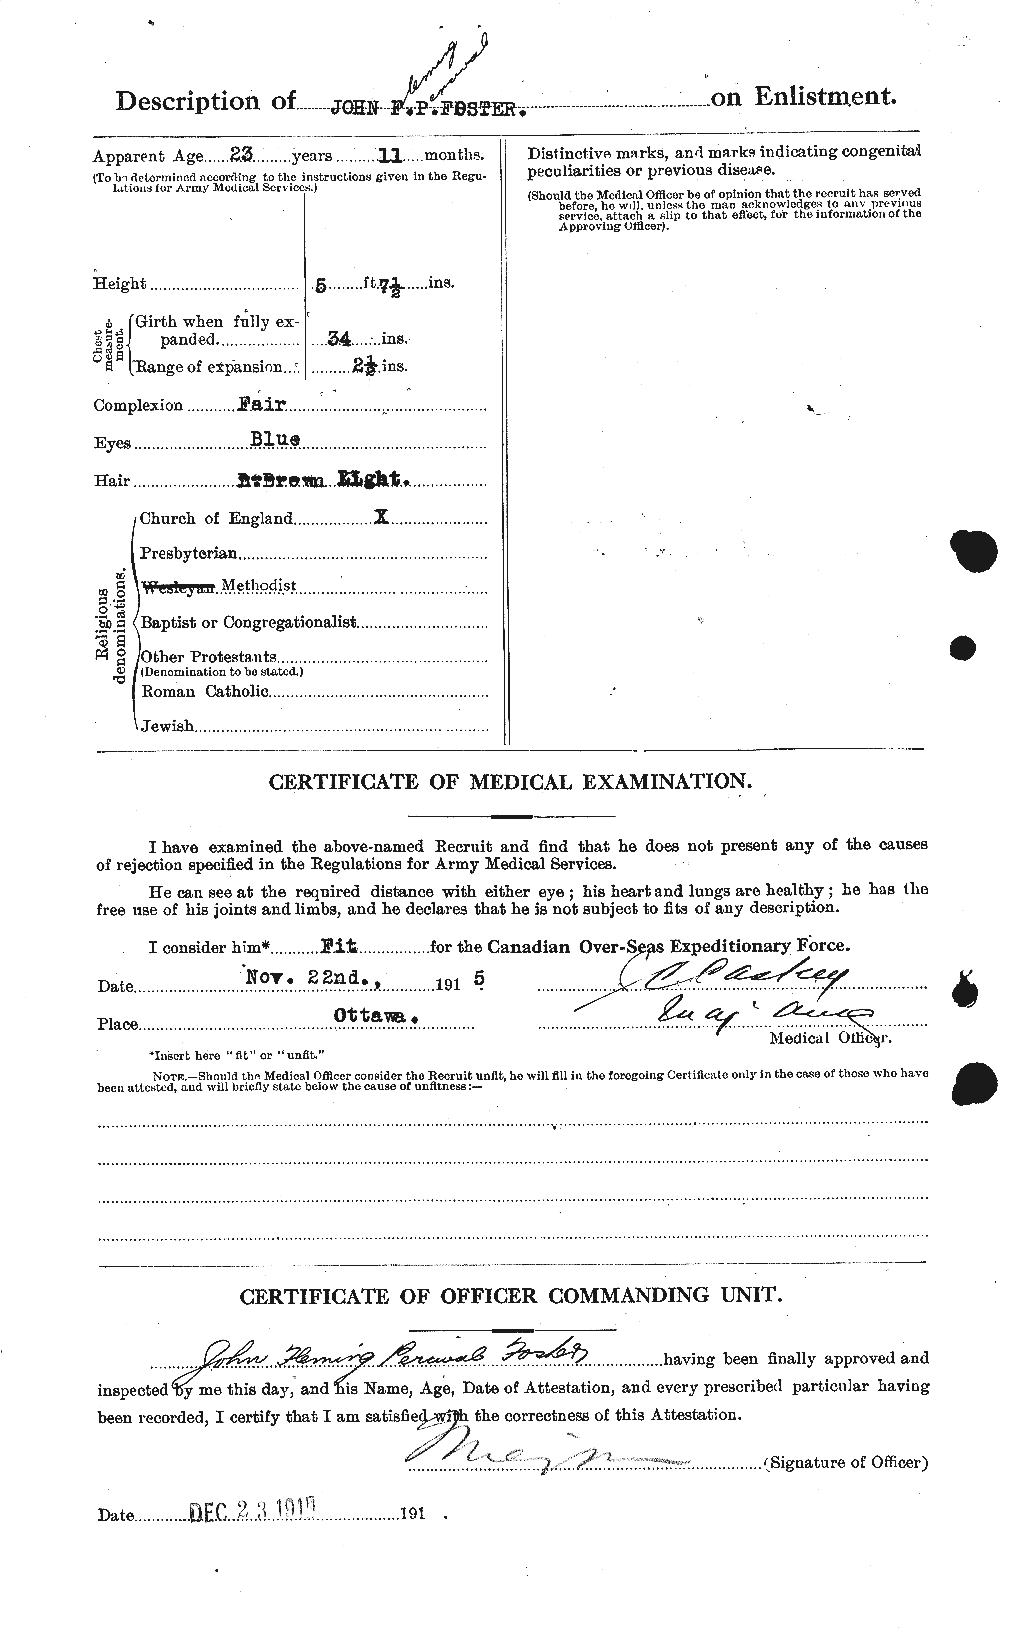 Personnel Records of the First World War - CEF 333358b